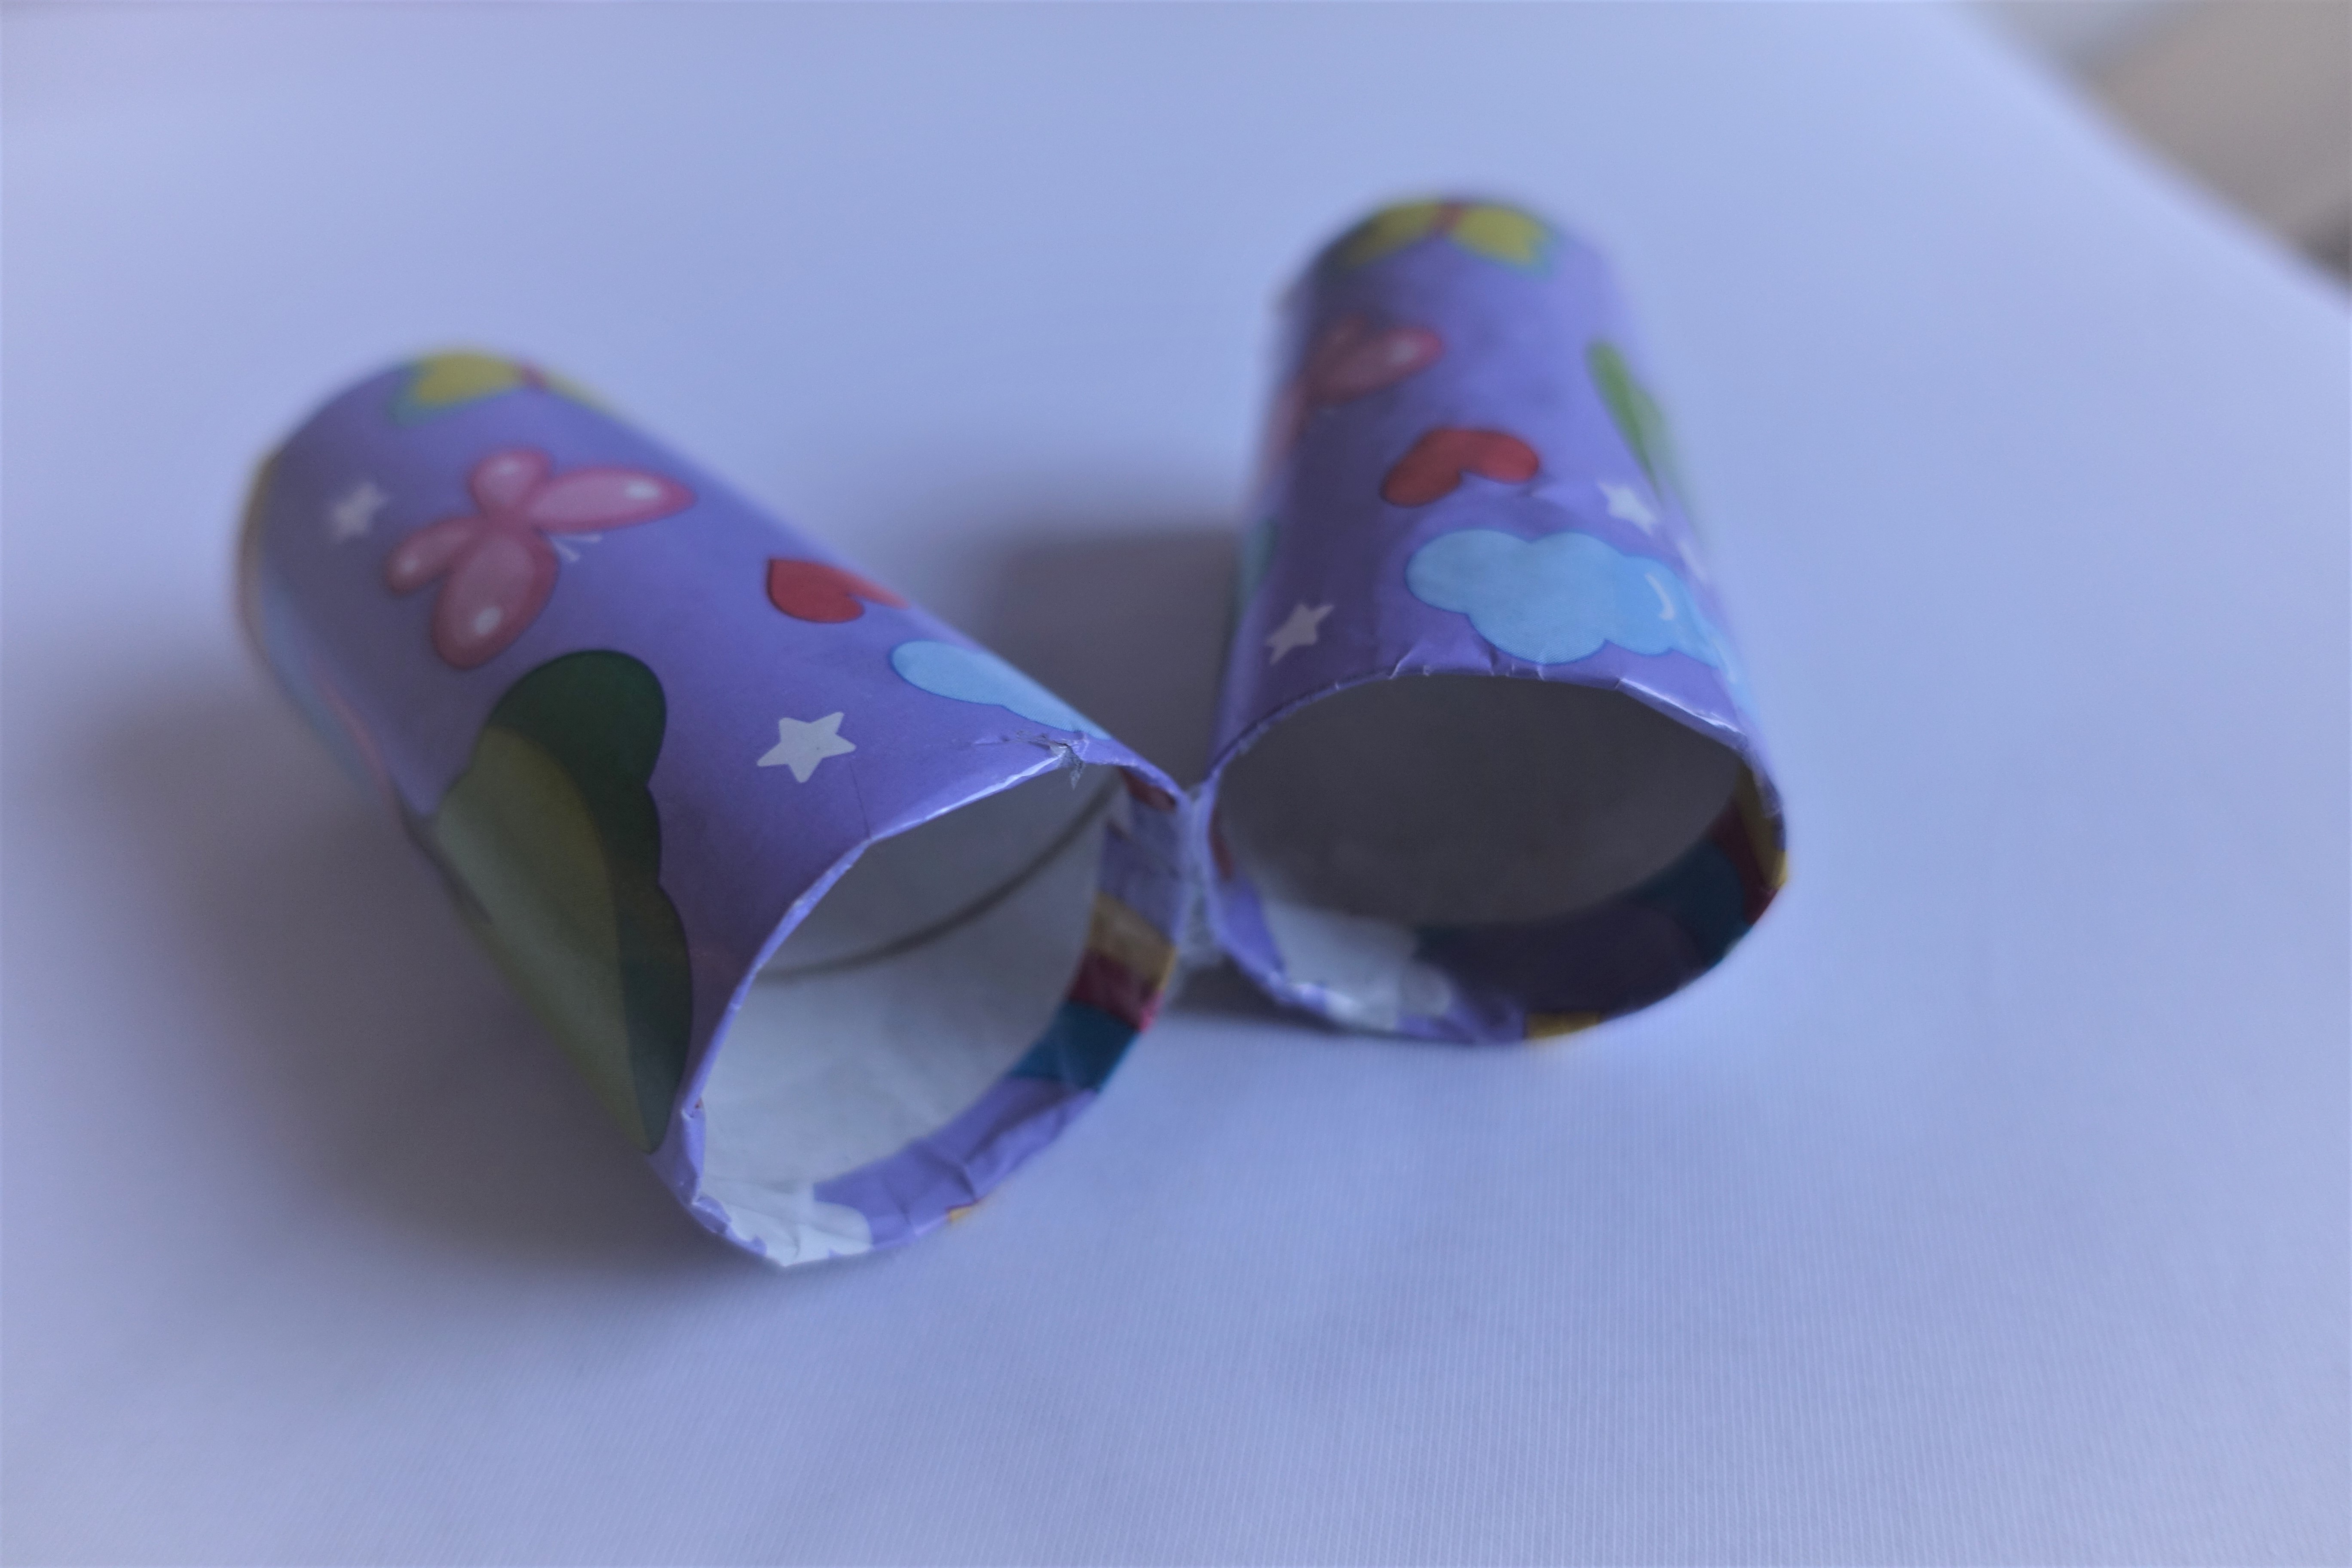 Two toilet paper rolls covered with a purple unicorn wrapping paper